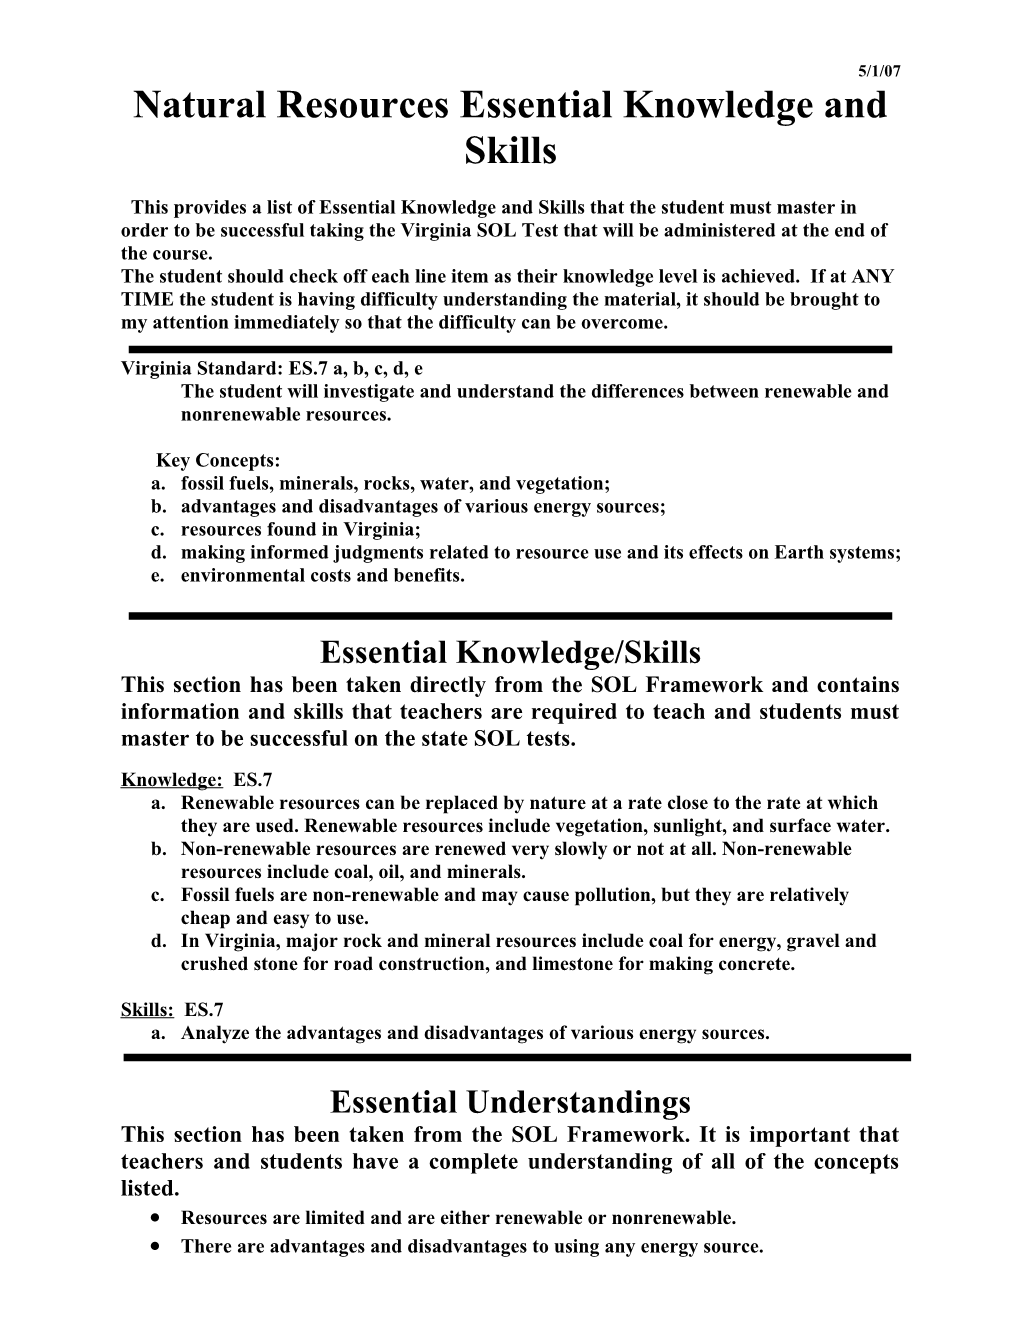 Earth Science Essential Knowledge and Skills